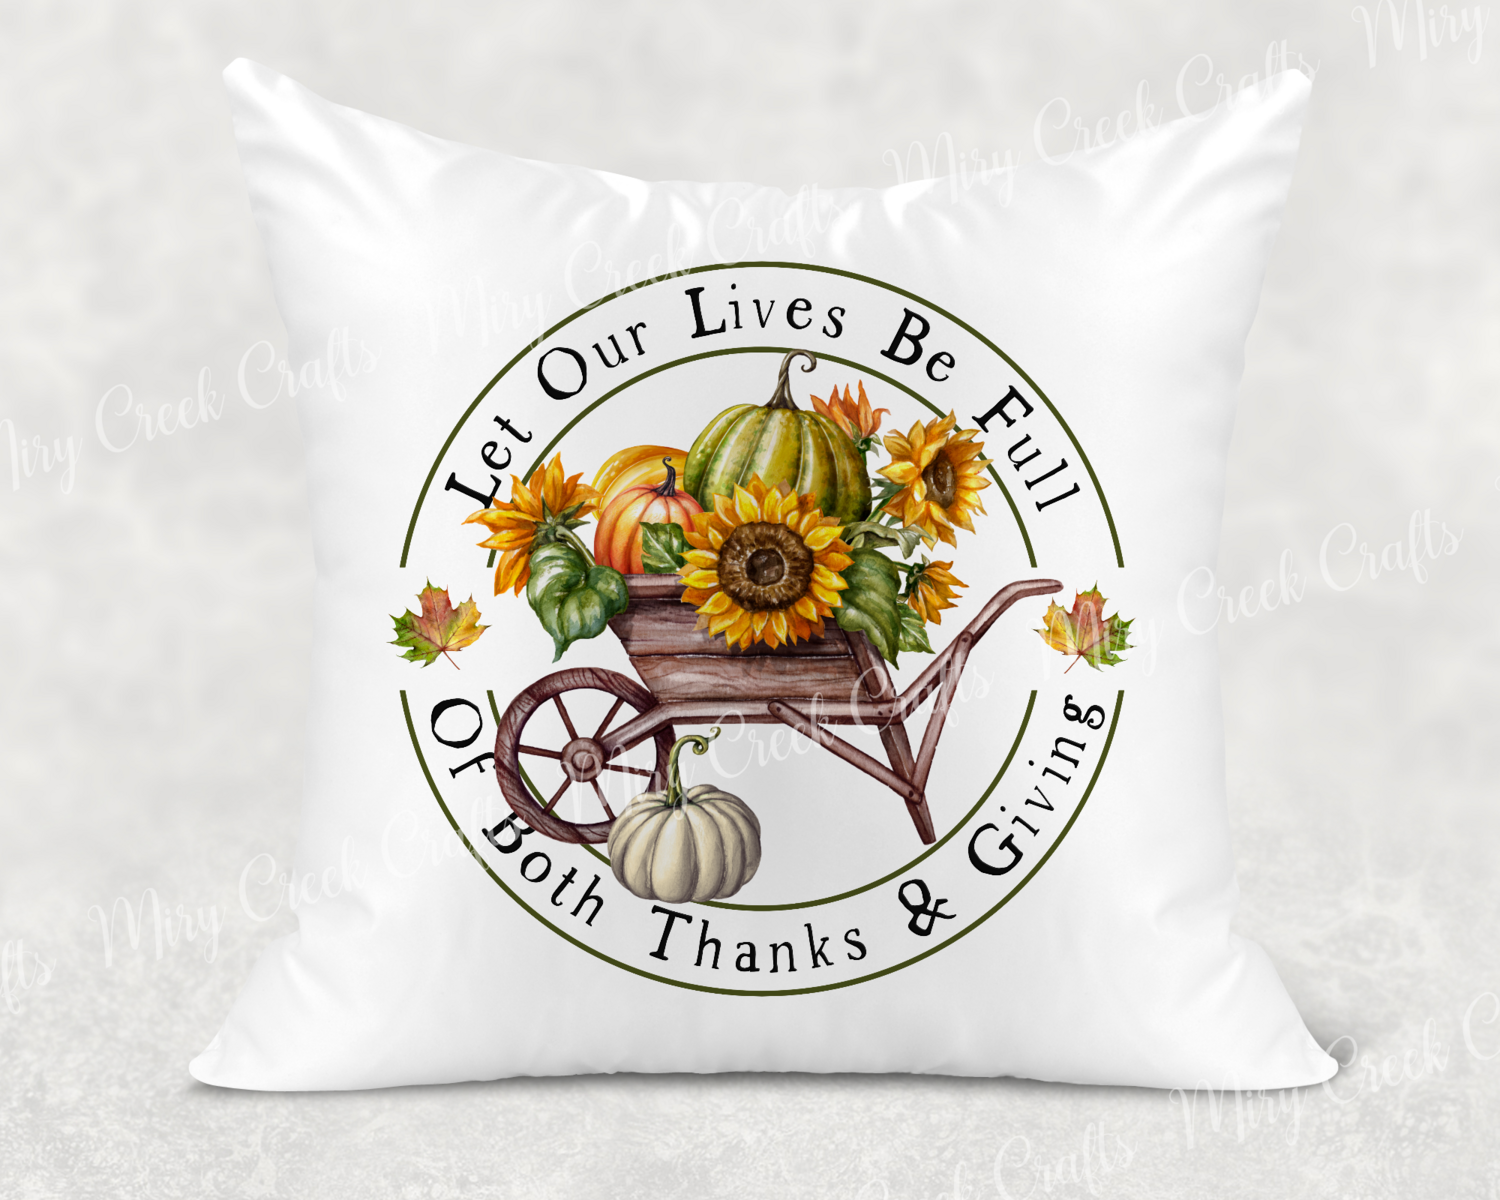 Lives be Full of Thanks & Giving Pillow Cover